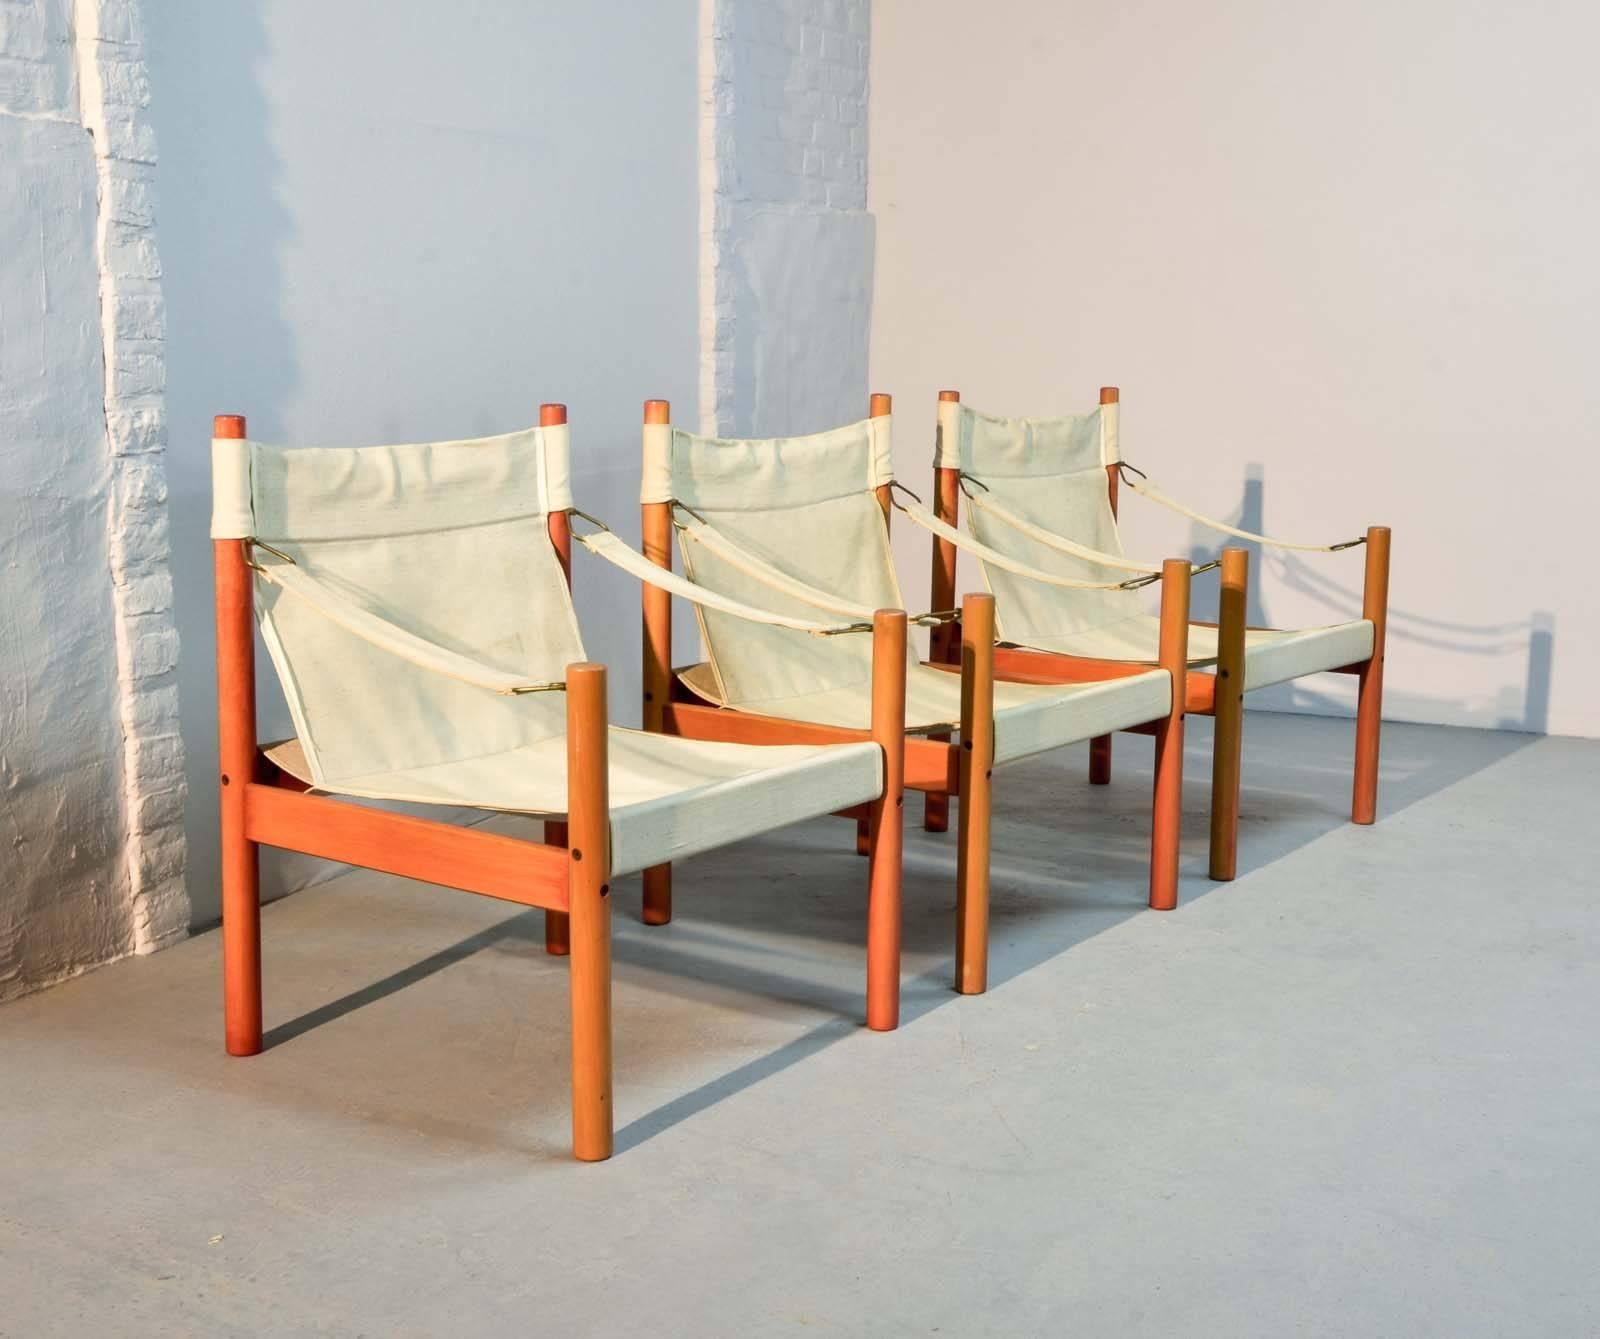 Set of three authentic midcentury armchairs with a safari style construction. This Scandinavian canvas set with solid carrot red colored wooden frames which is in style of the Danish designer Erik Worts, is produced in the 1960s. The chairs are in